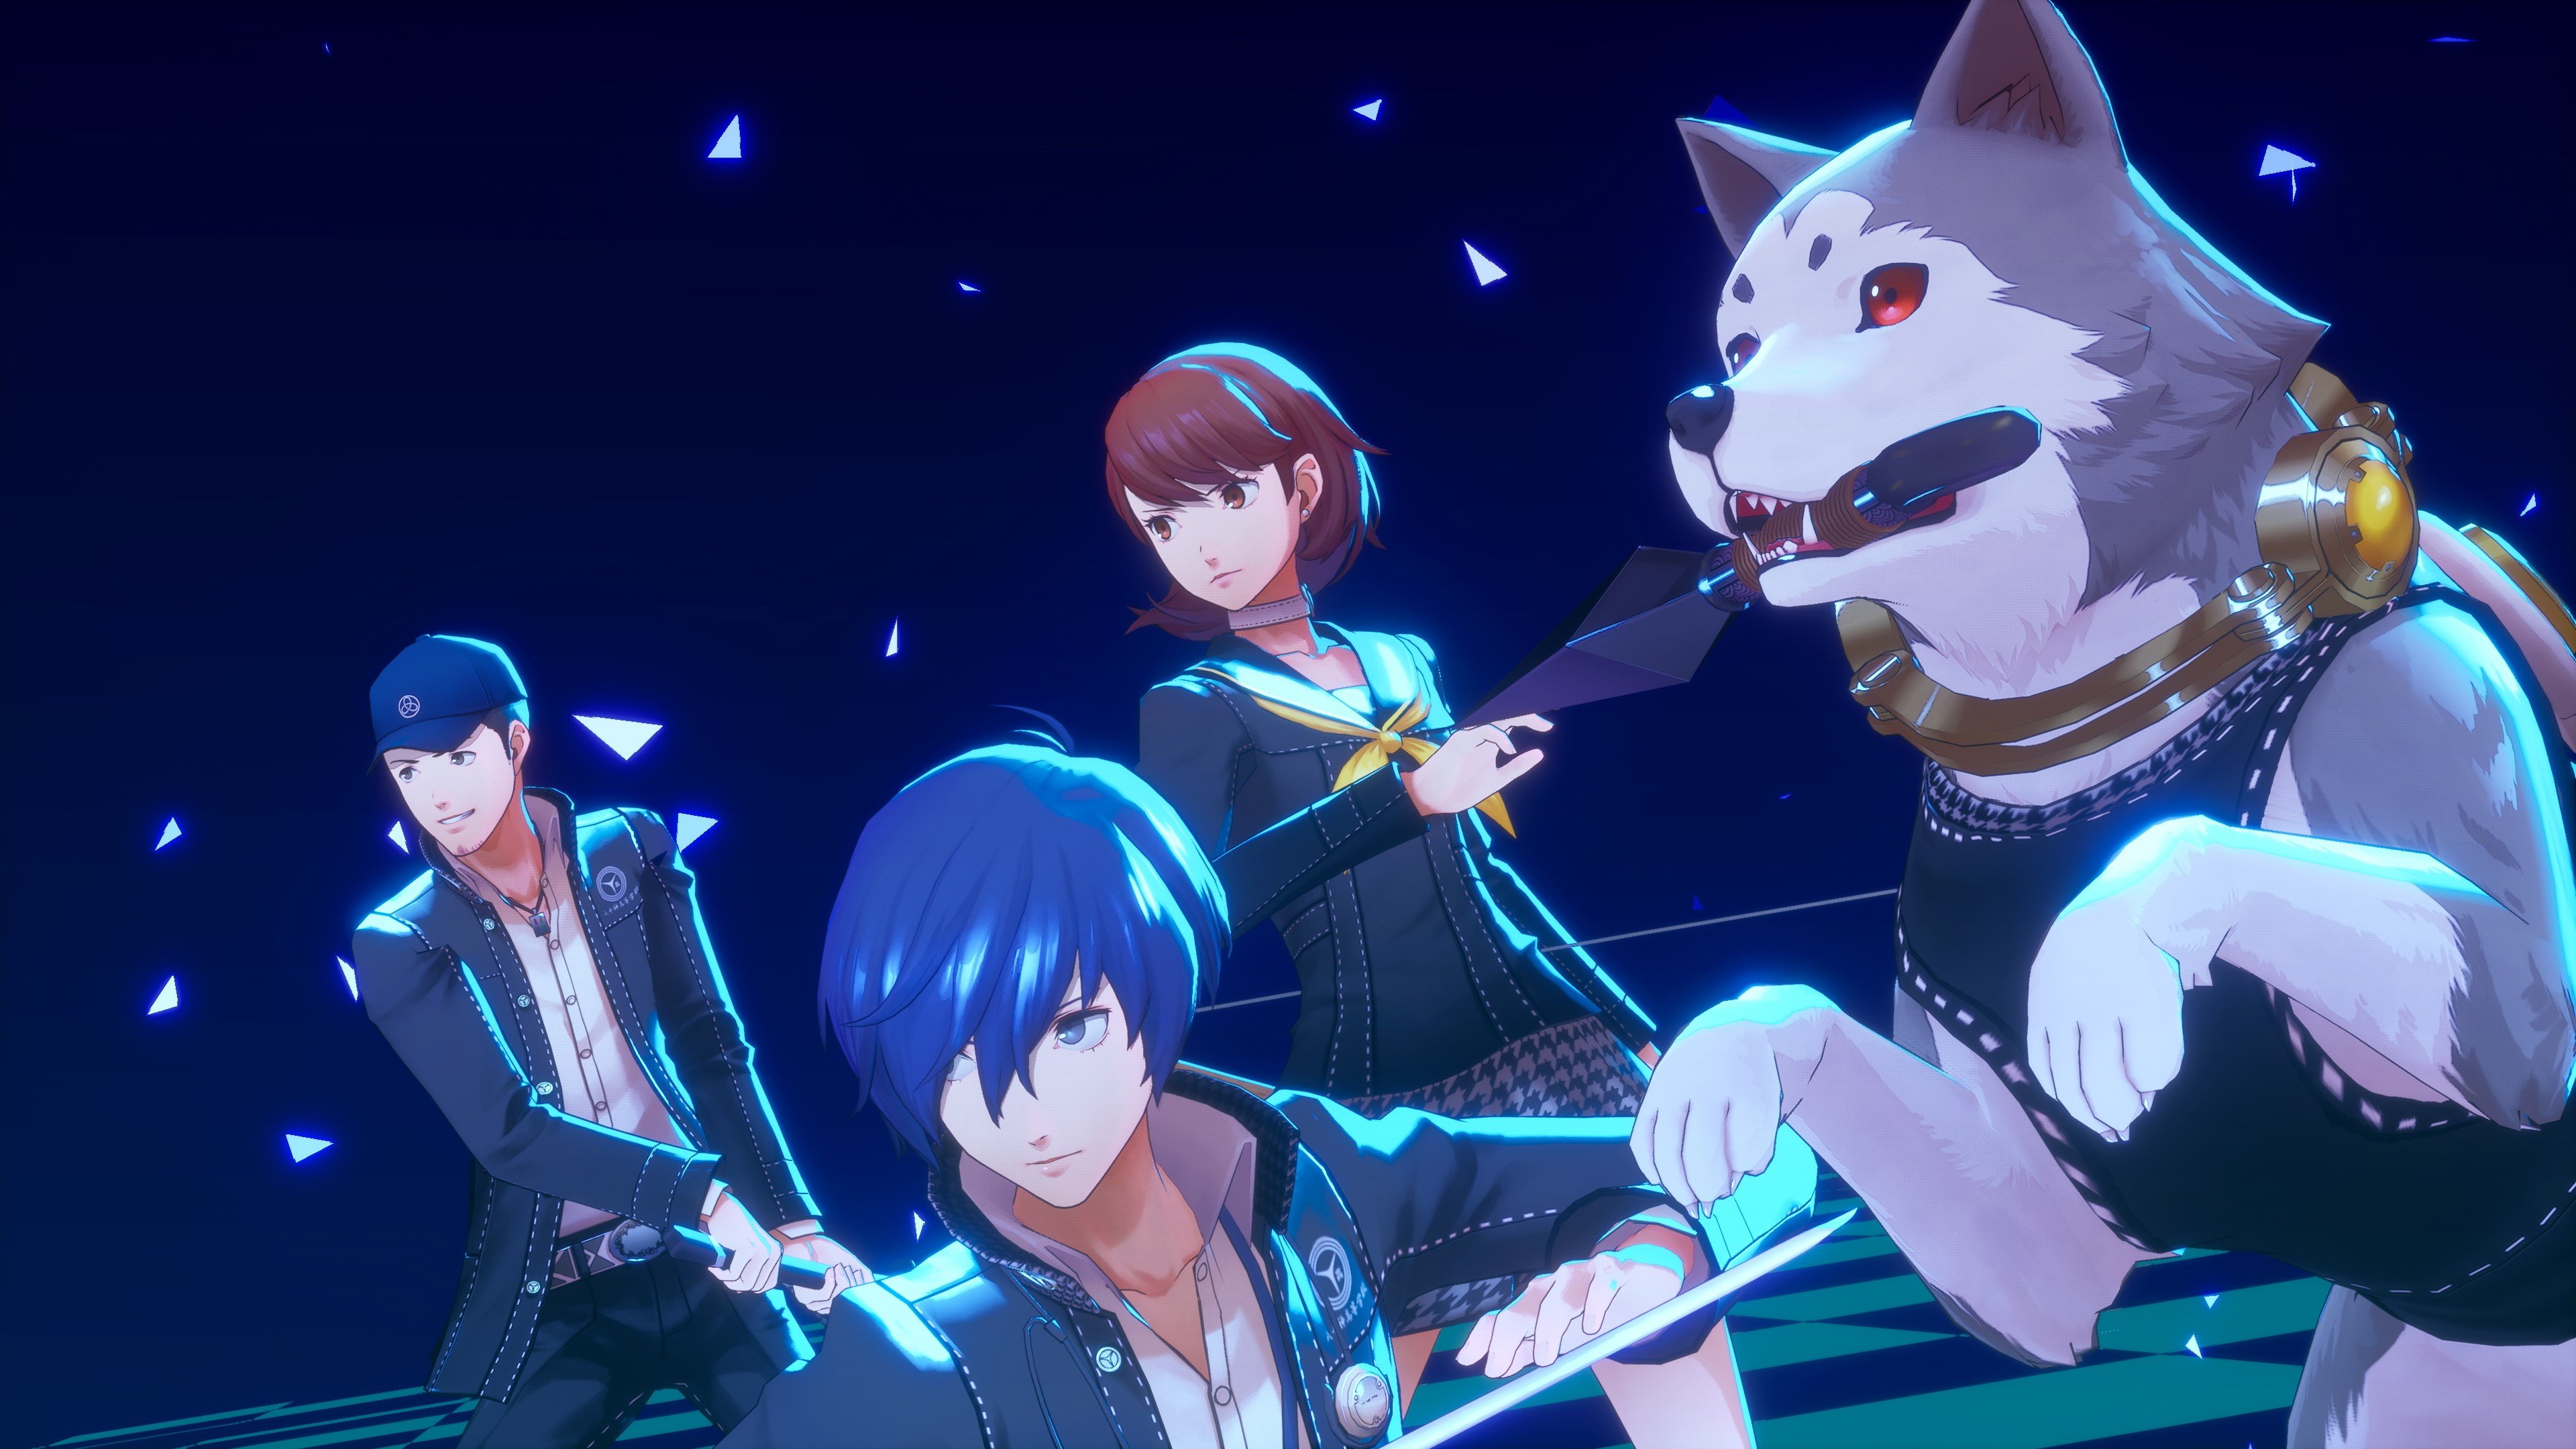 Day 1 DLC for Persona 3 Reload has been announced